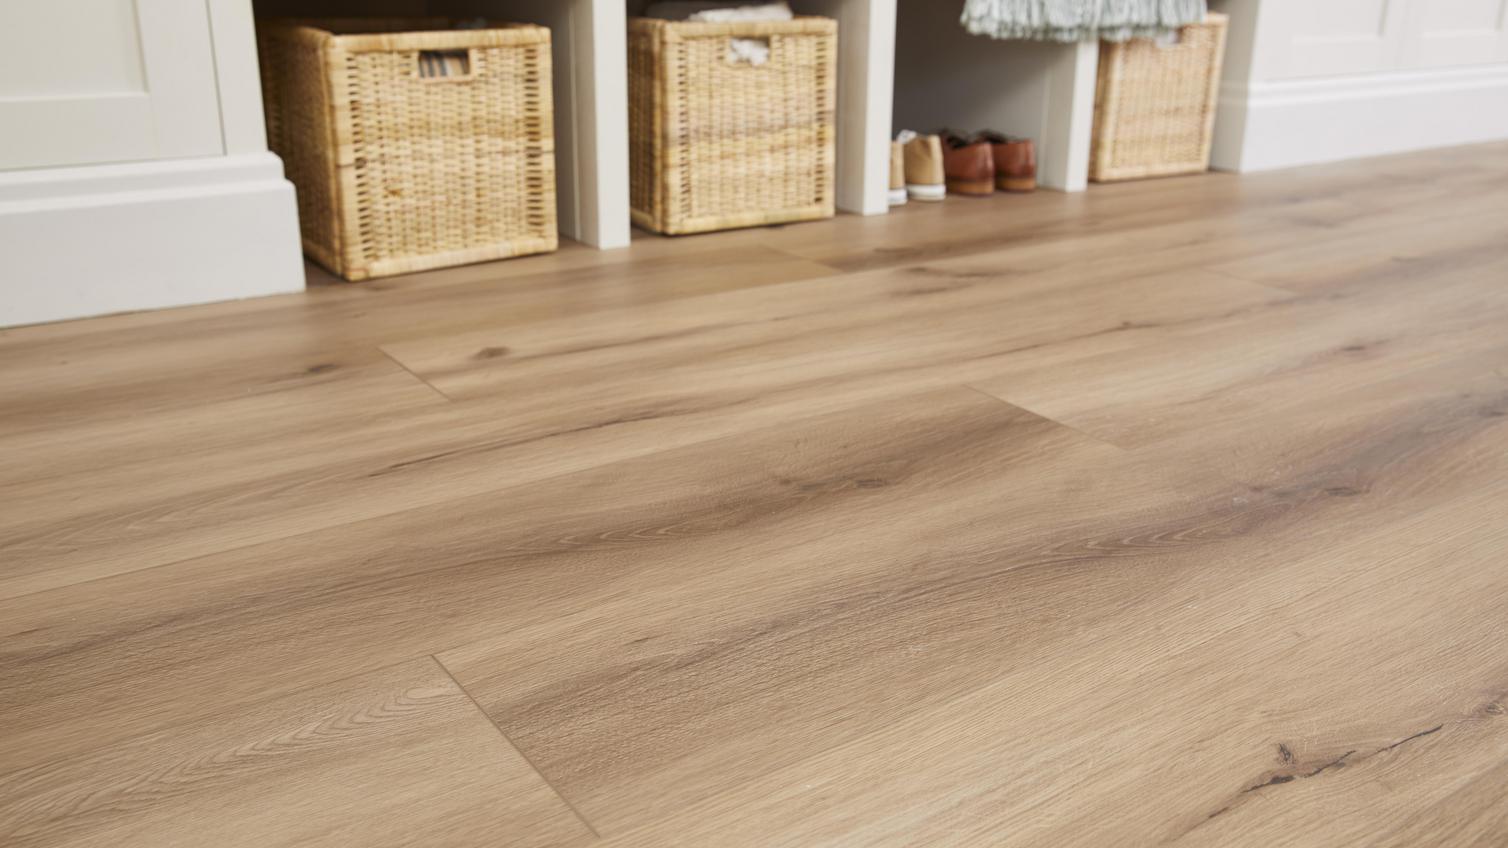 Oake & Gray plank flooring made from tough laminate